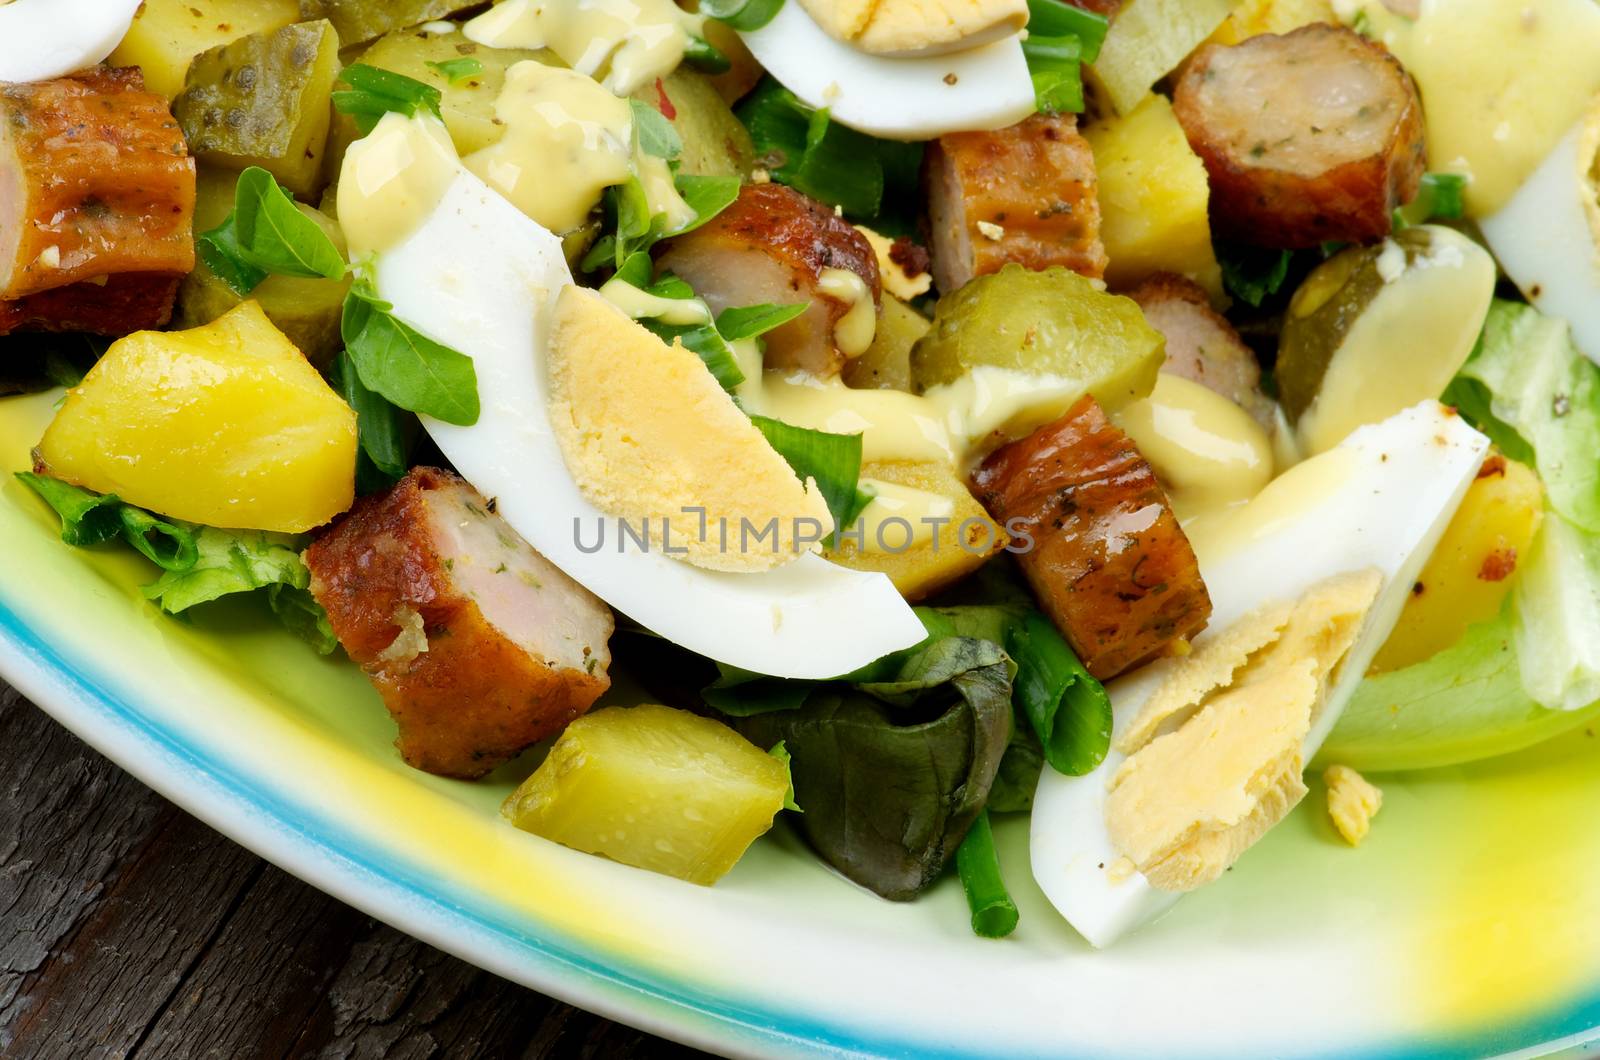 Homemade Delicious Potato and Smoked Sausage Salad with Gherkins, Lettuce, Boiled Eggs and Mustard Sauce on Yellow and Green Plate closeup